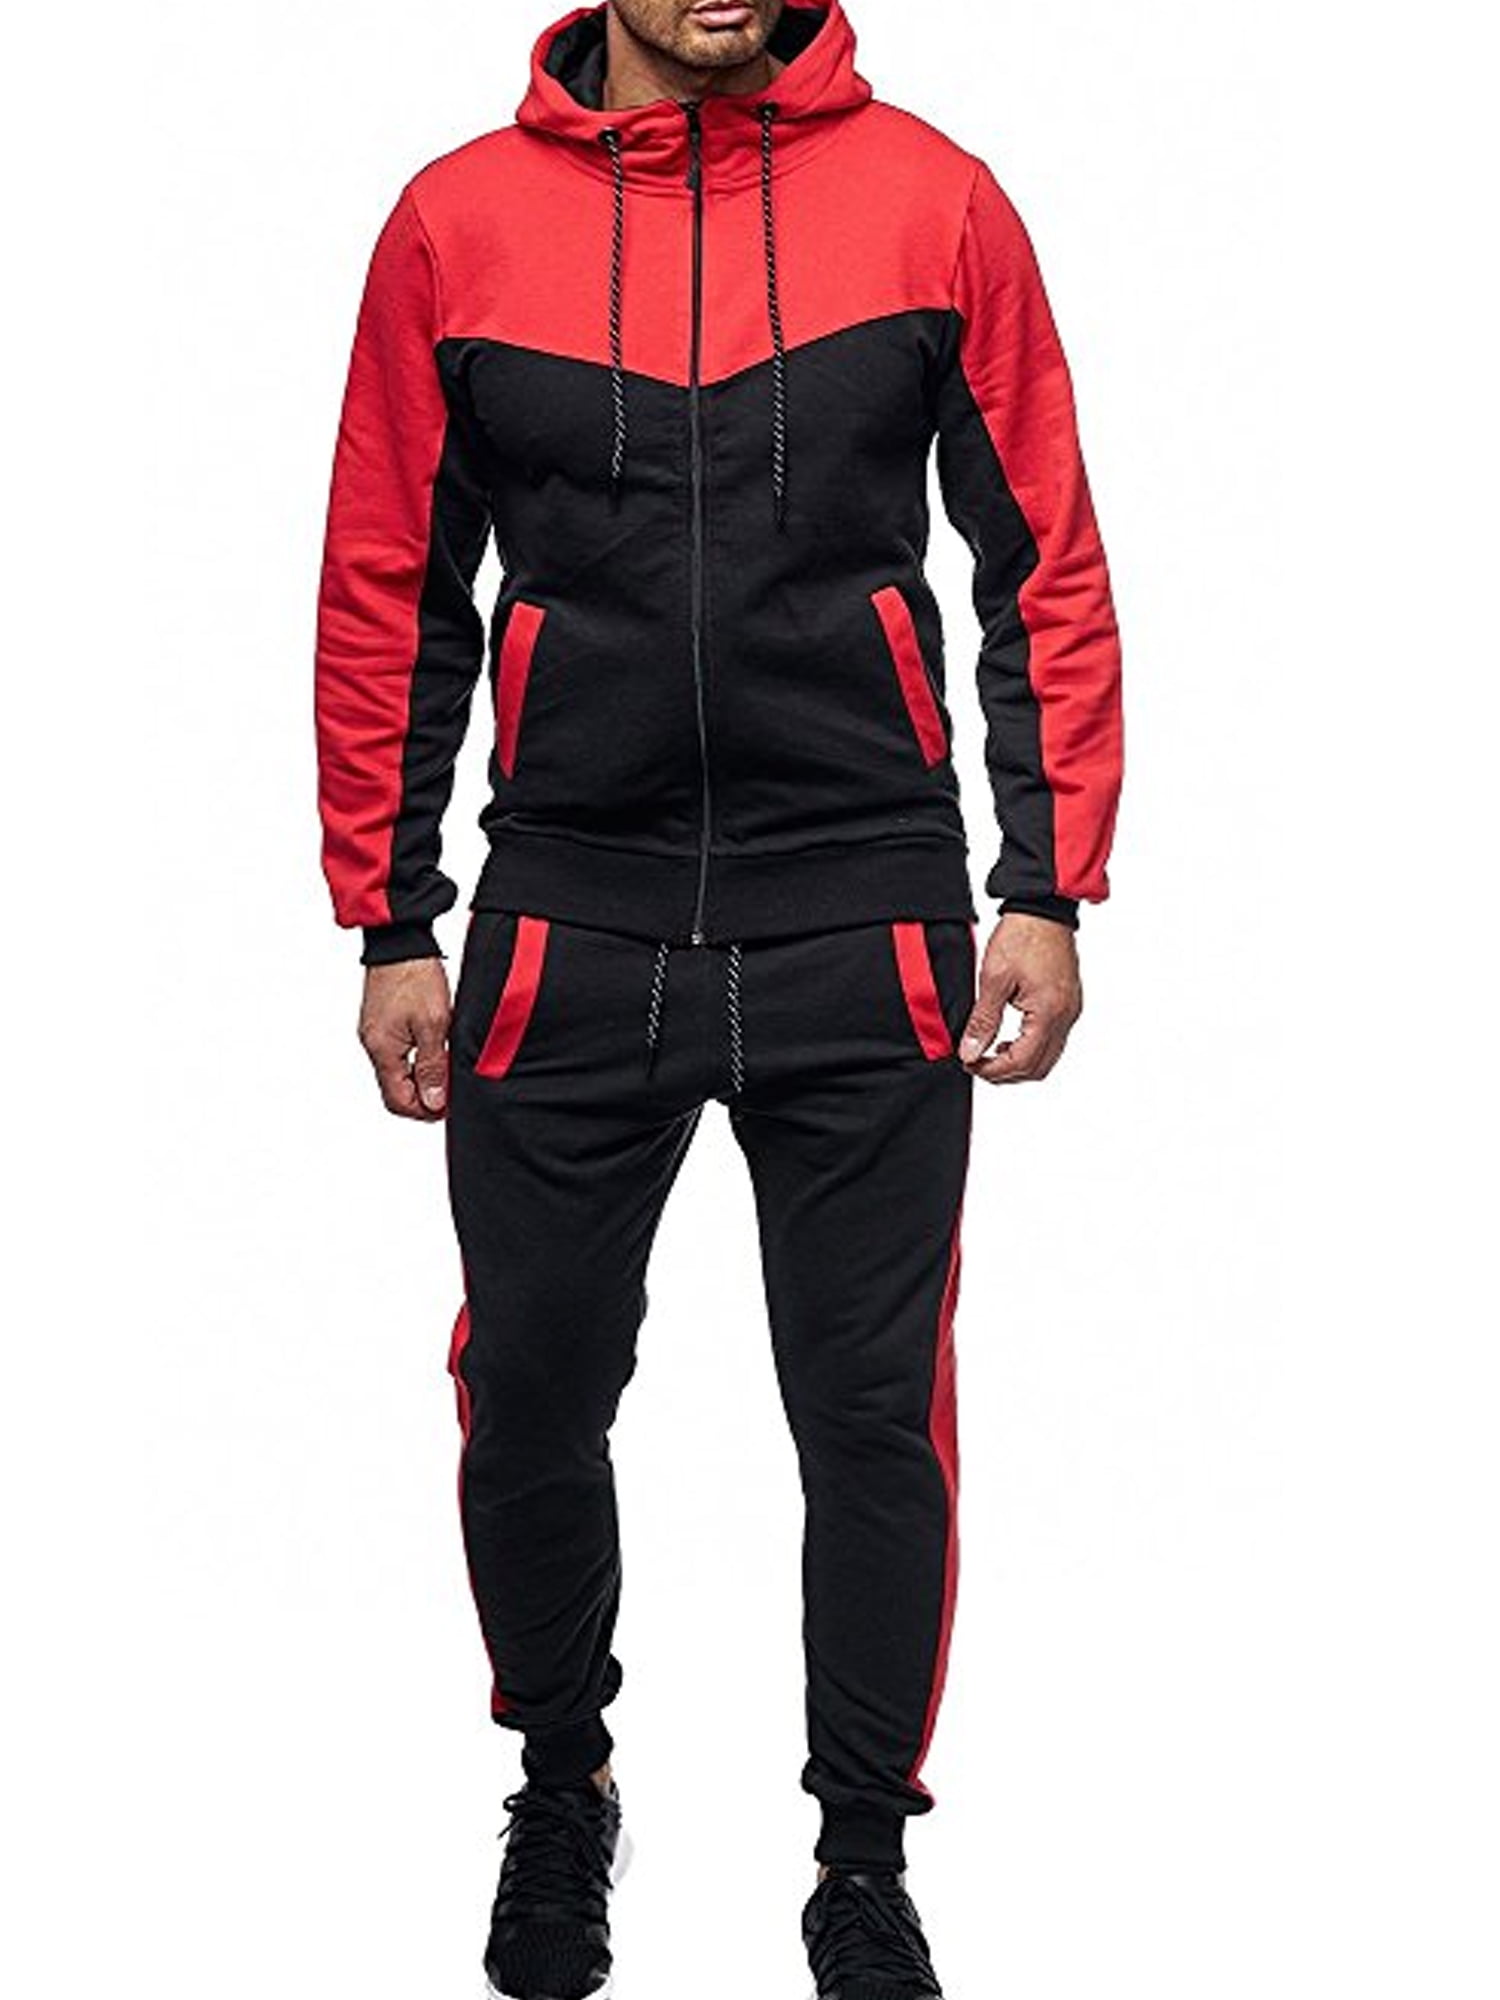 New Kids Contrast Cord Hooded Tracksuit Set Zip Top Gym Jogging Bottom 